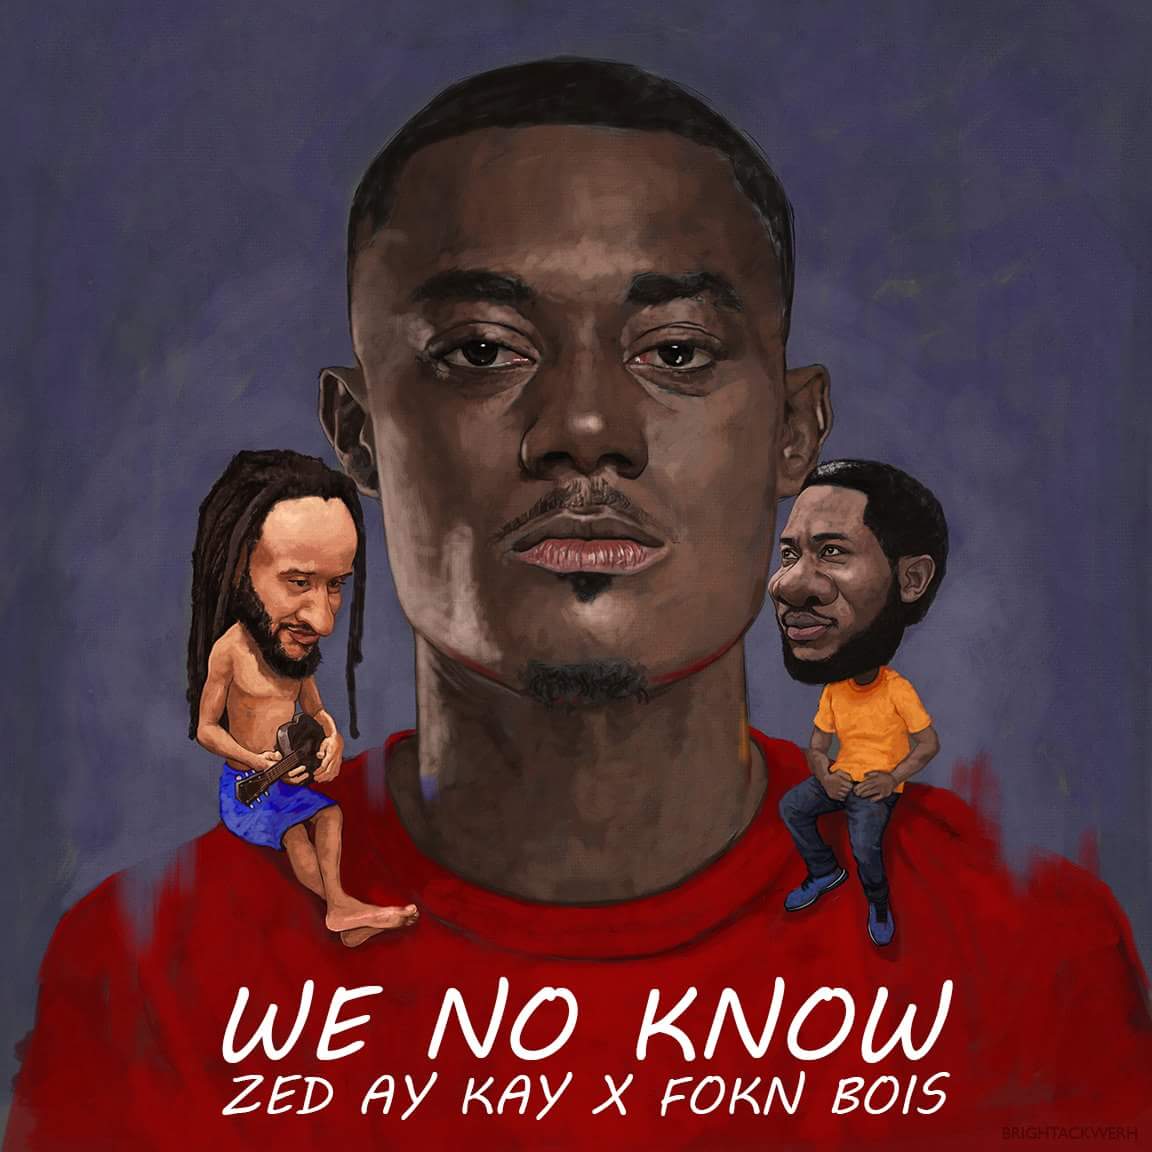 Video: Zed Ay Kay – We No Know ft. FOKN Bois